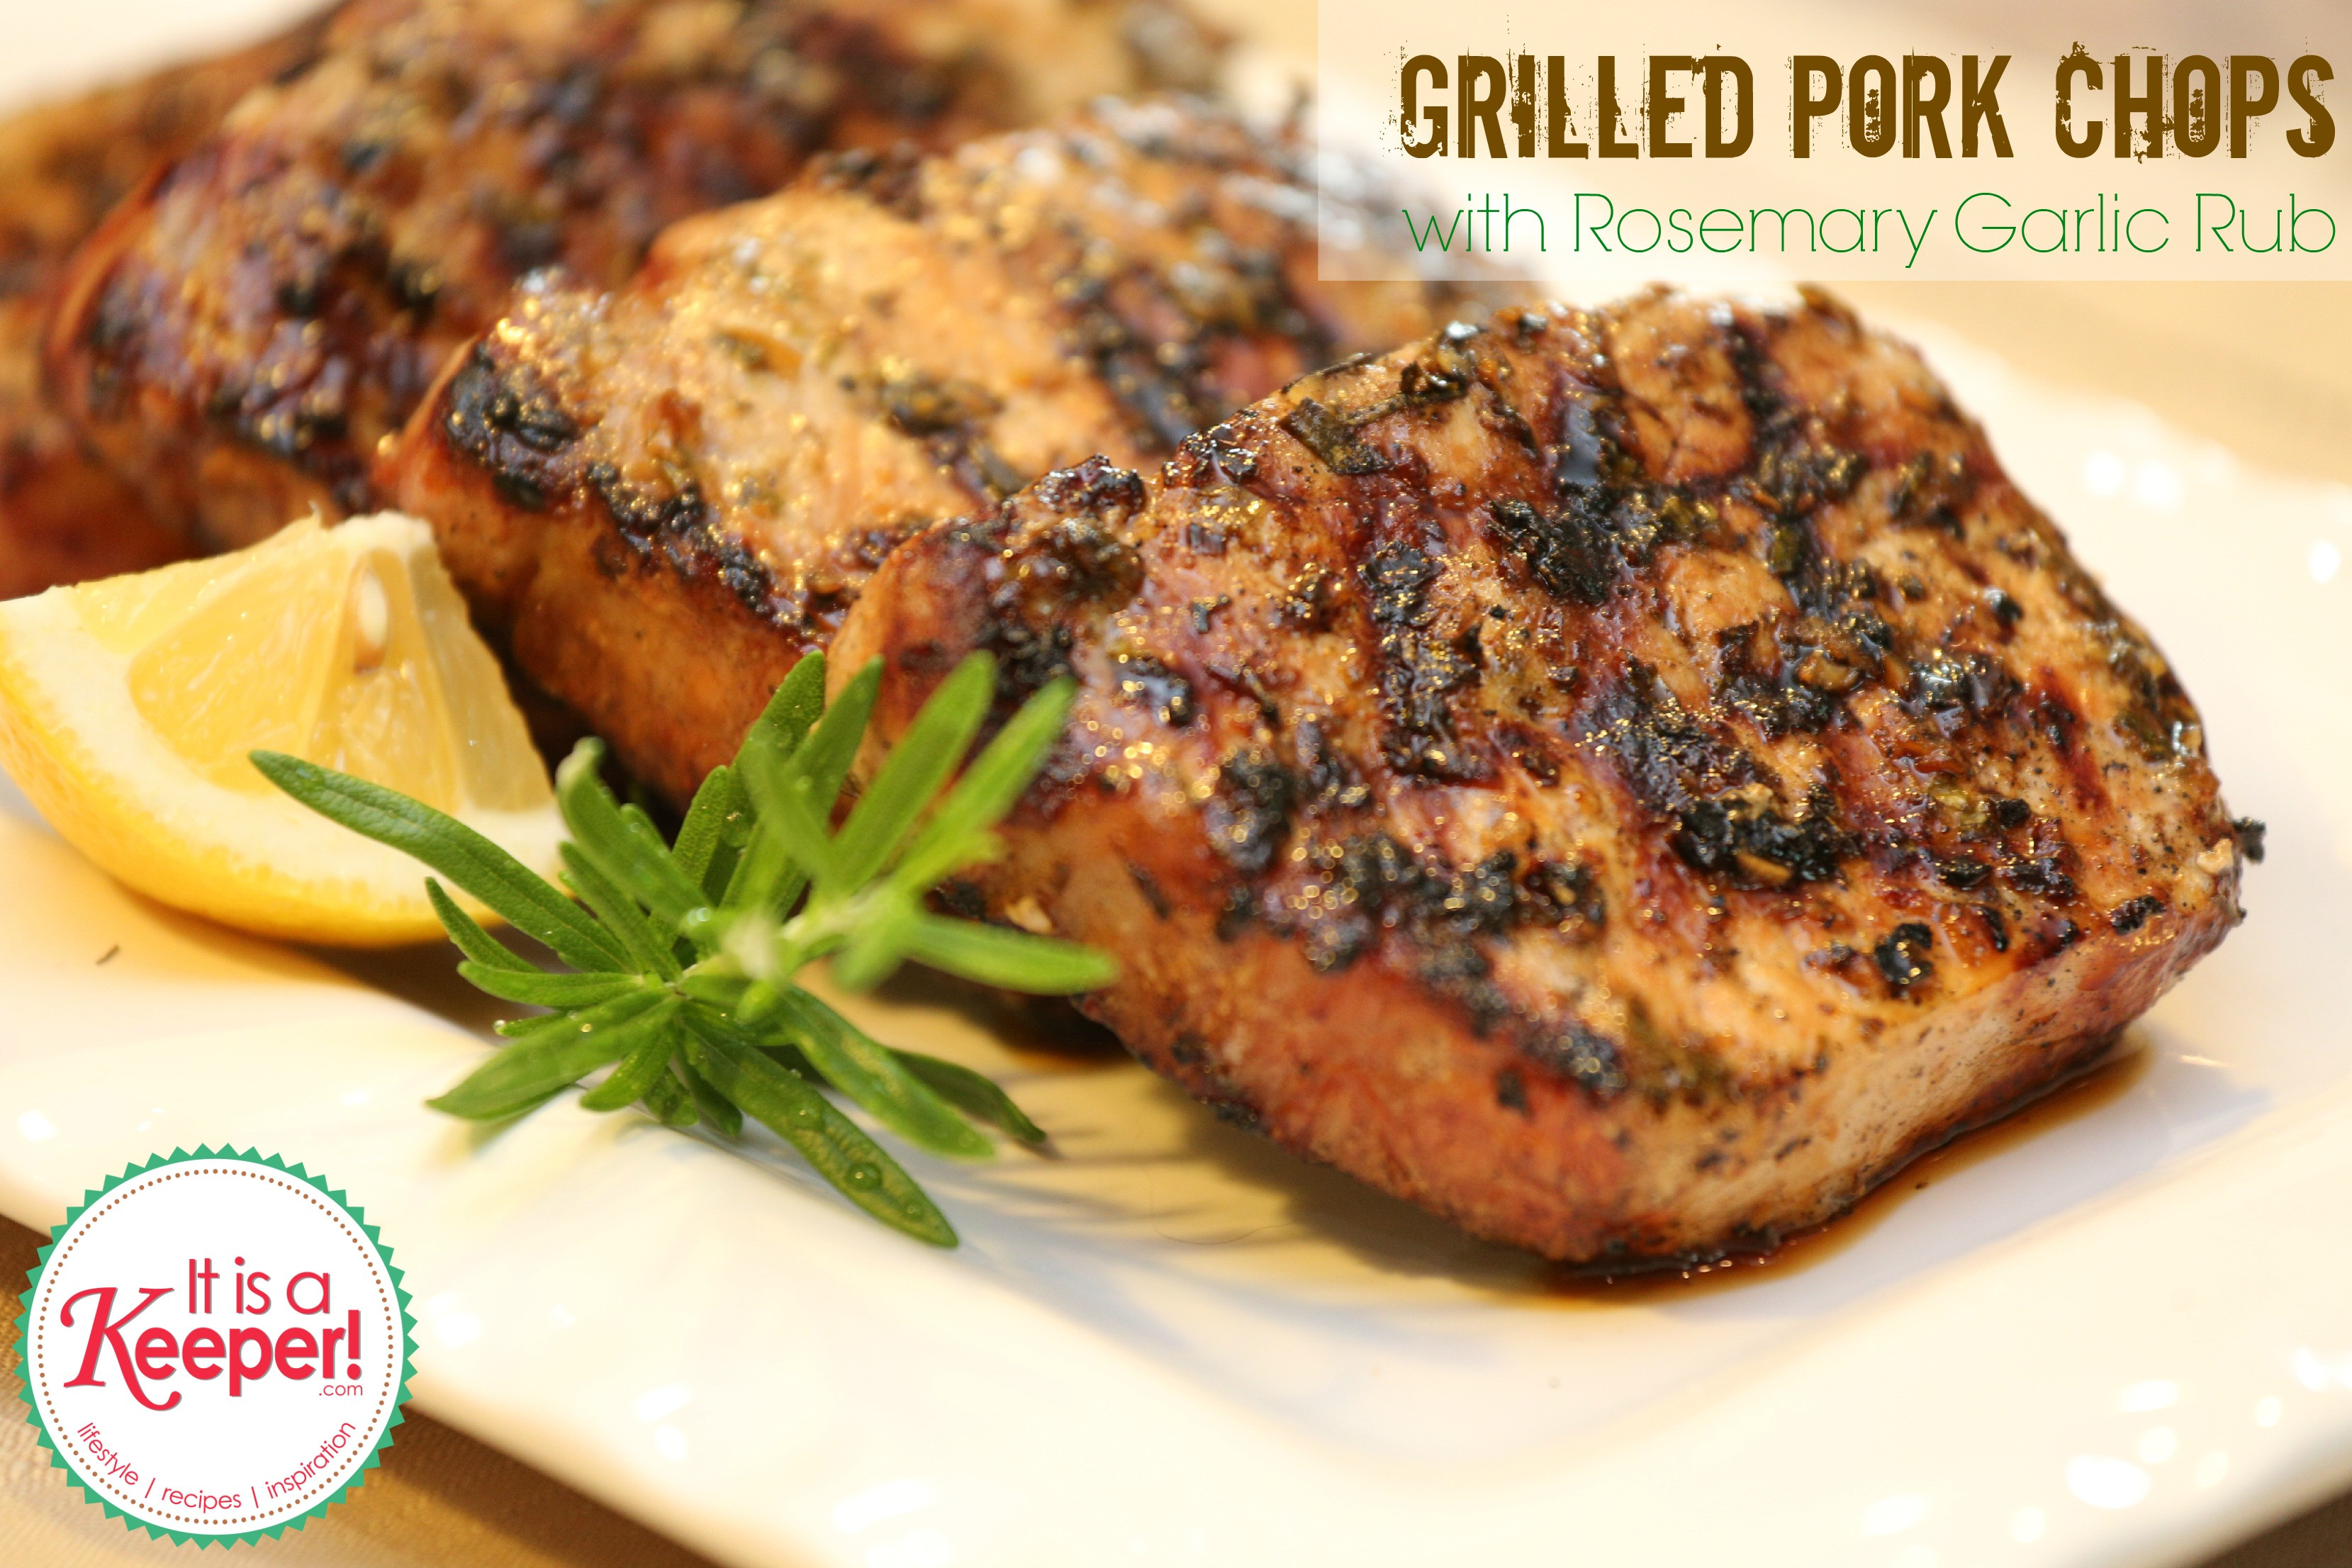 Cooking Pork Chops On The Grill
 Grilled Pork Chops with Rosemary Garlic Rub